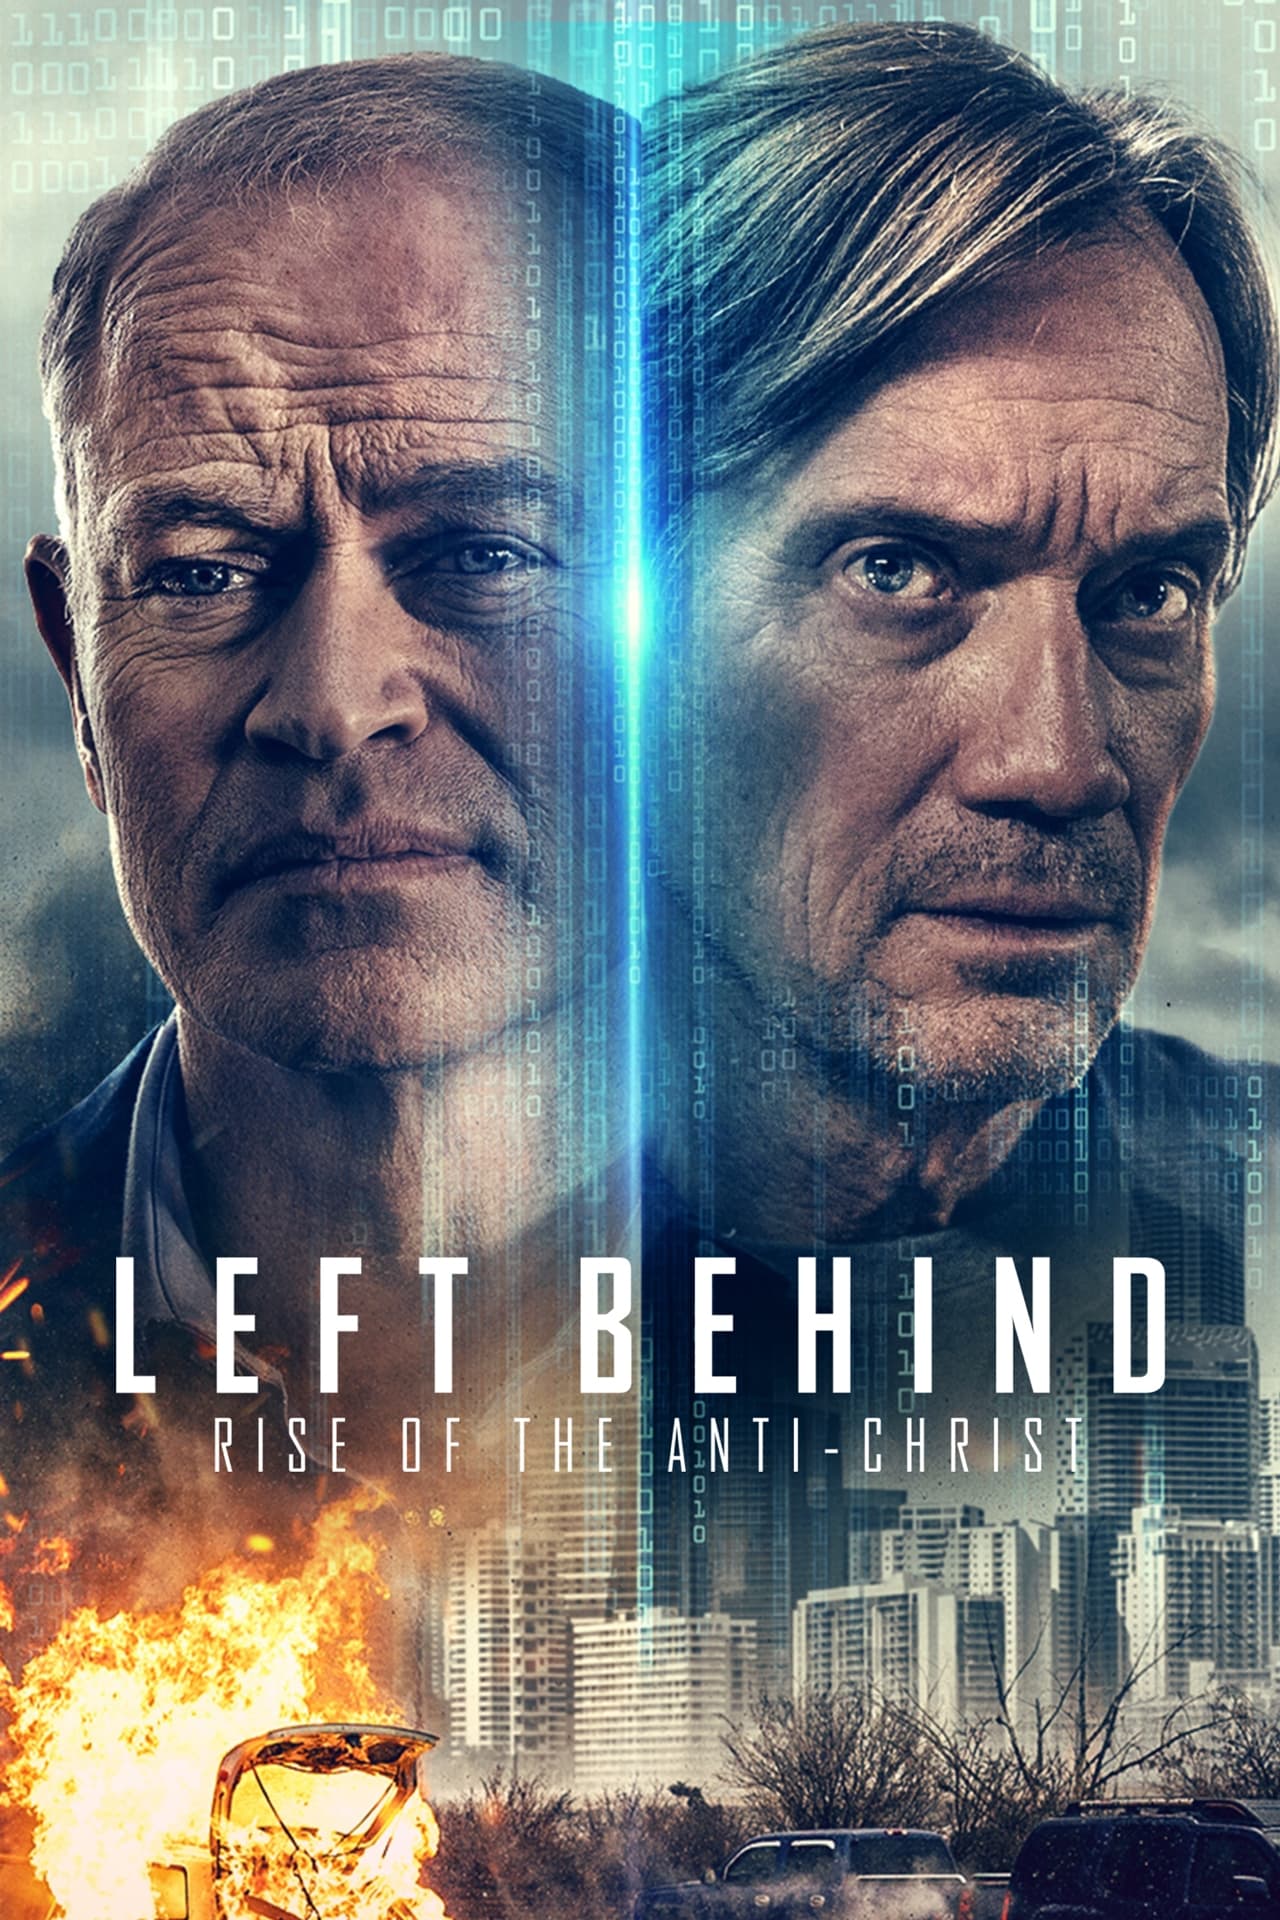 movie review left behind rise of the antichrist